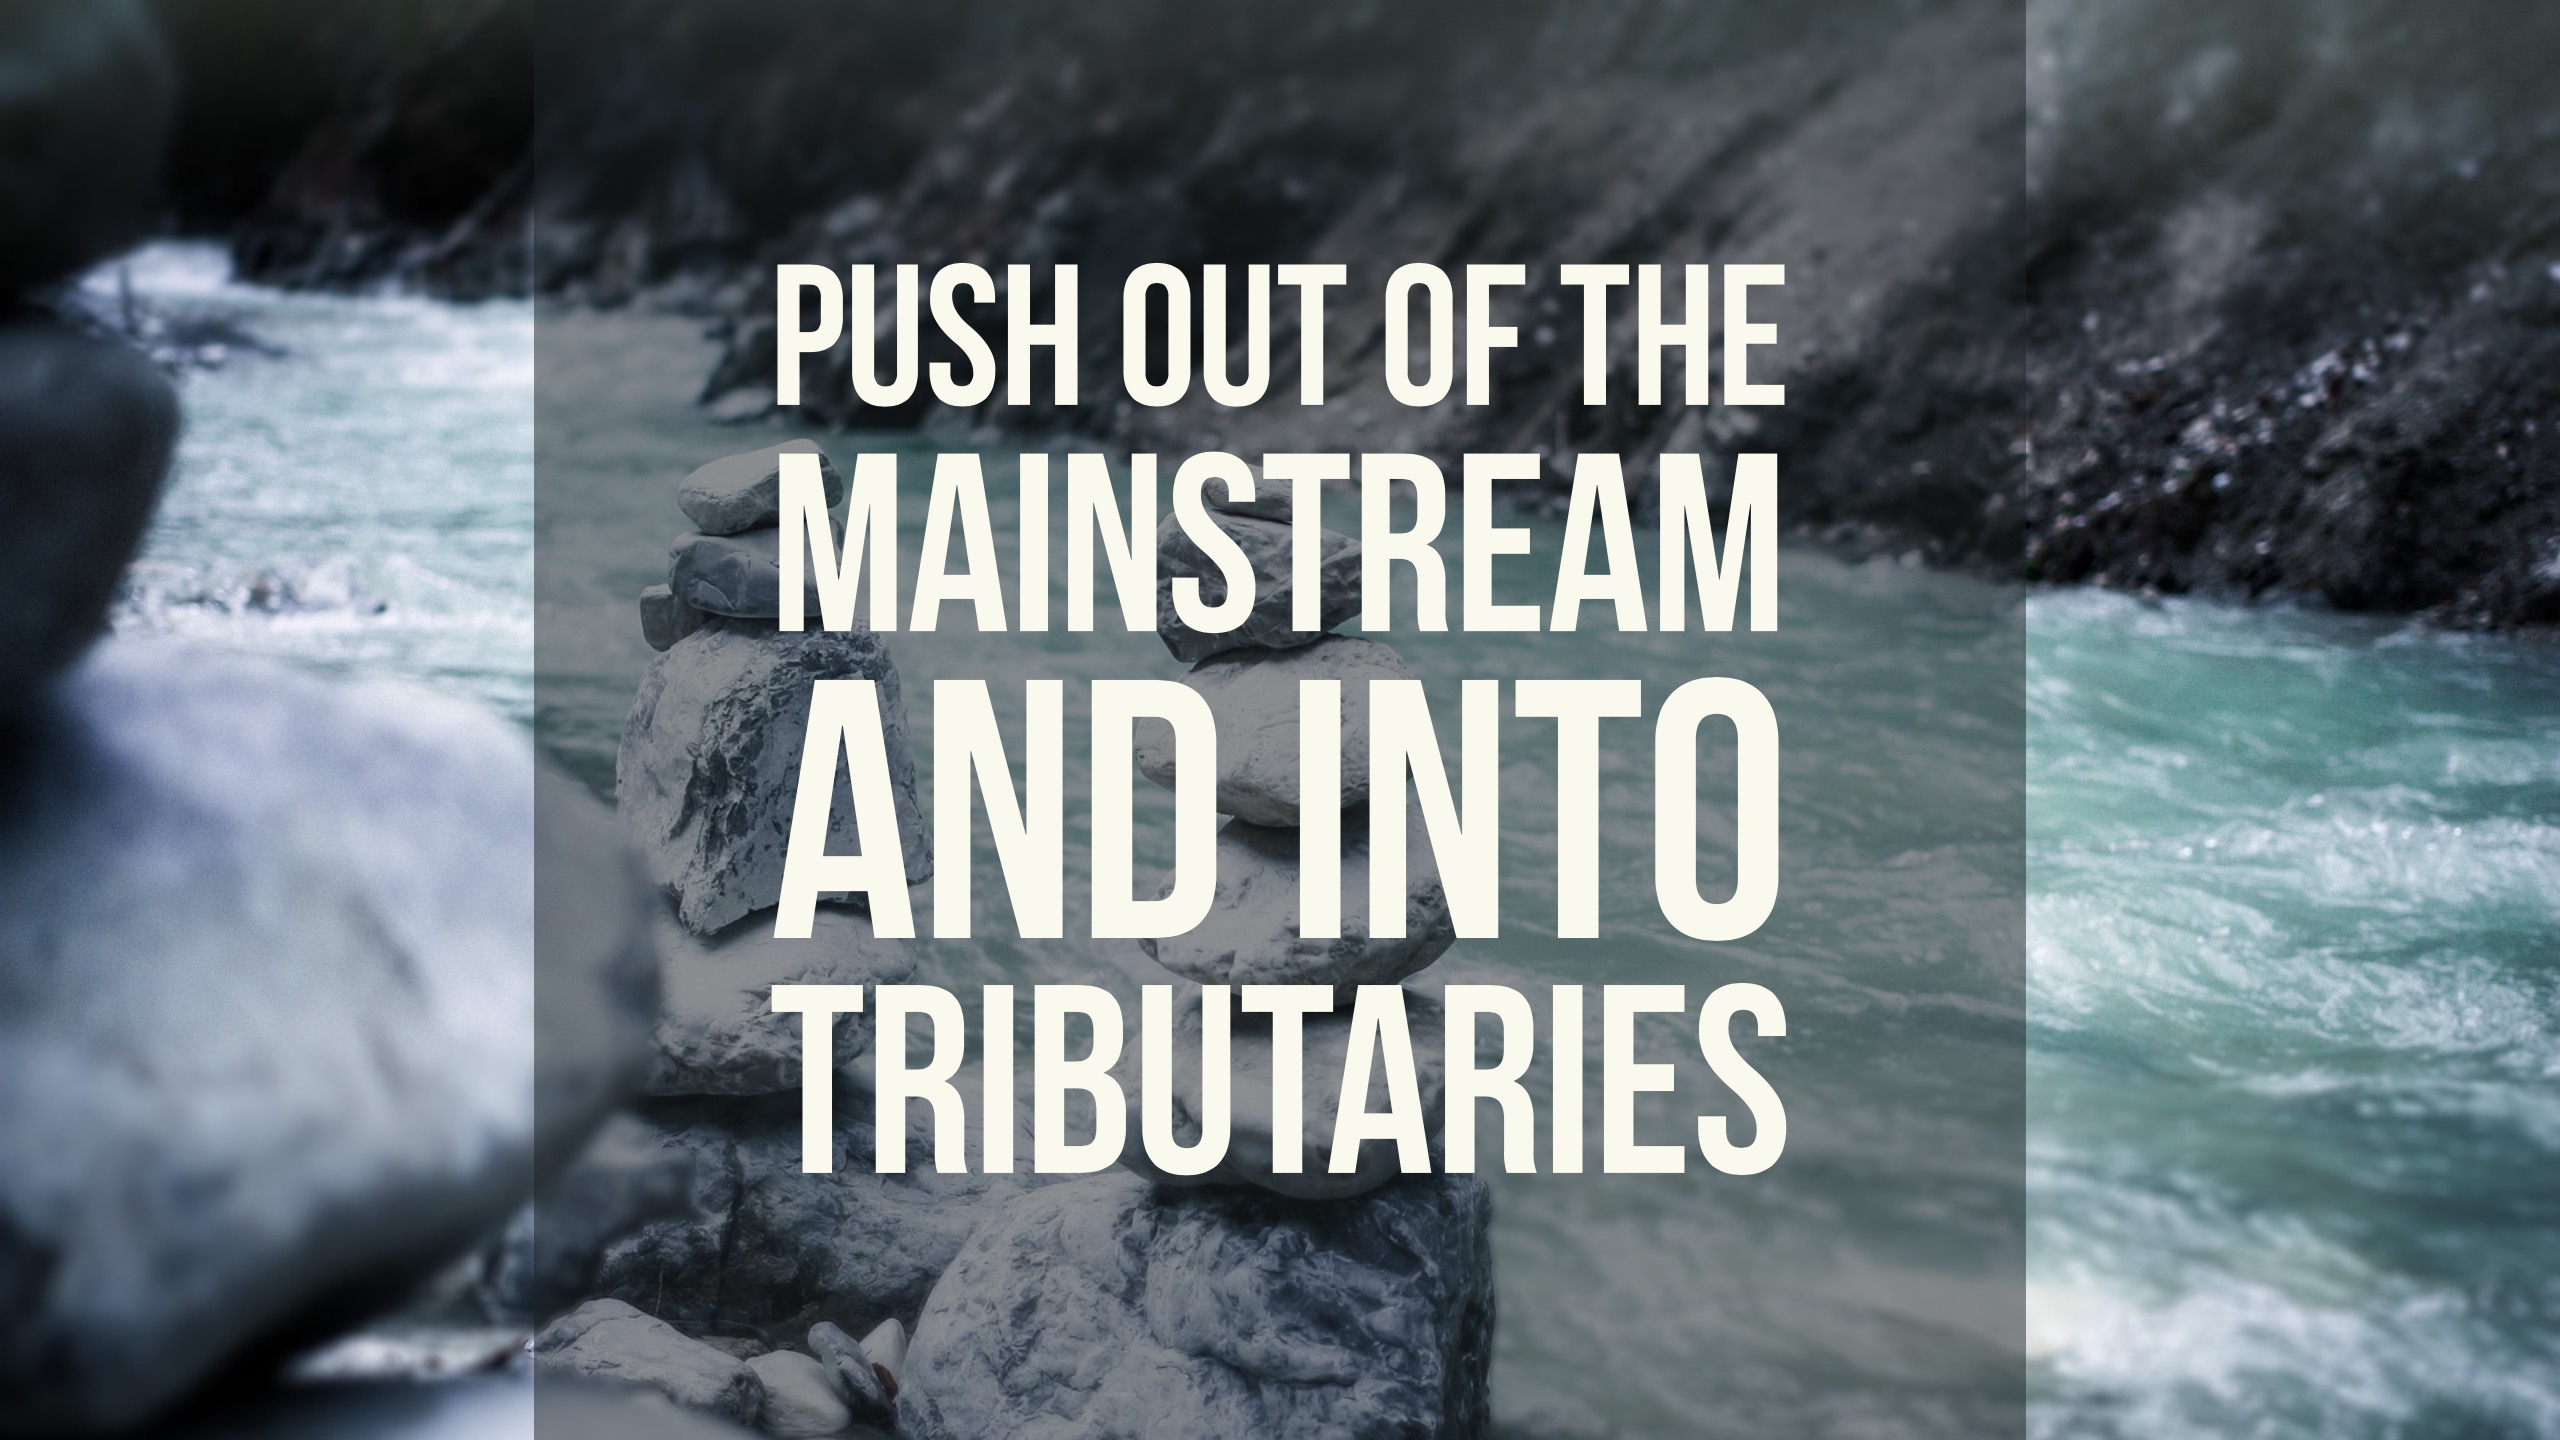 The Tributaries